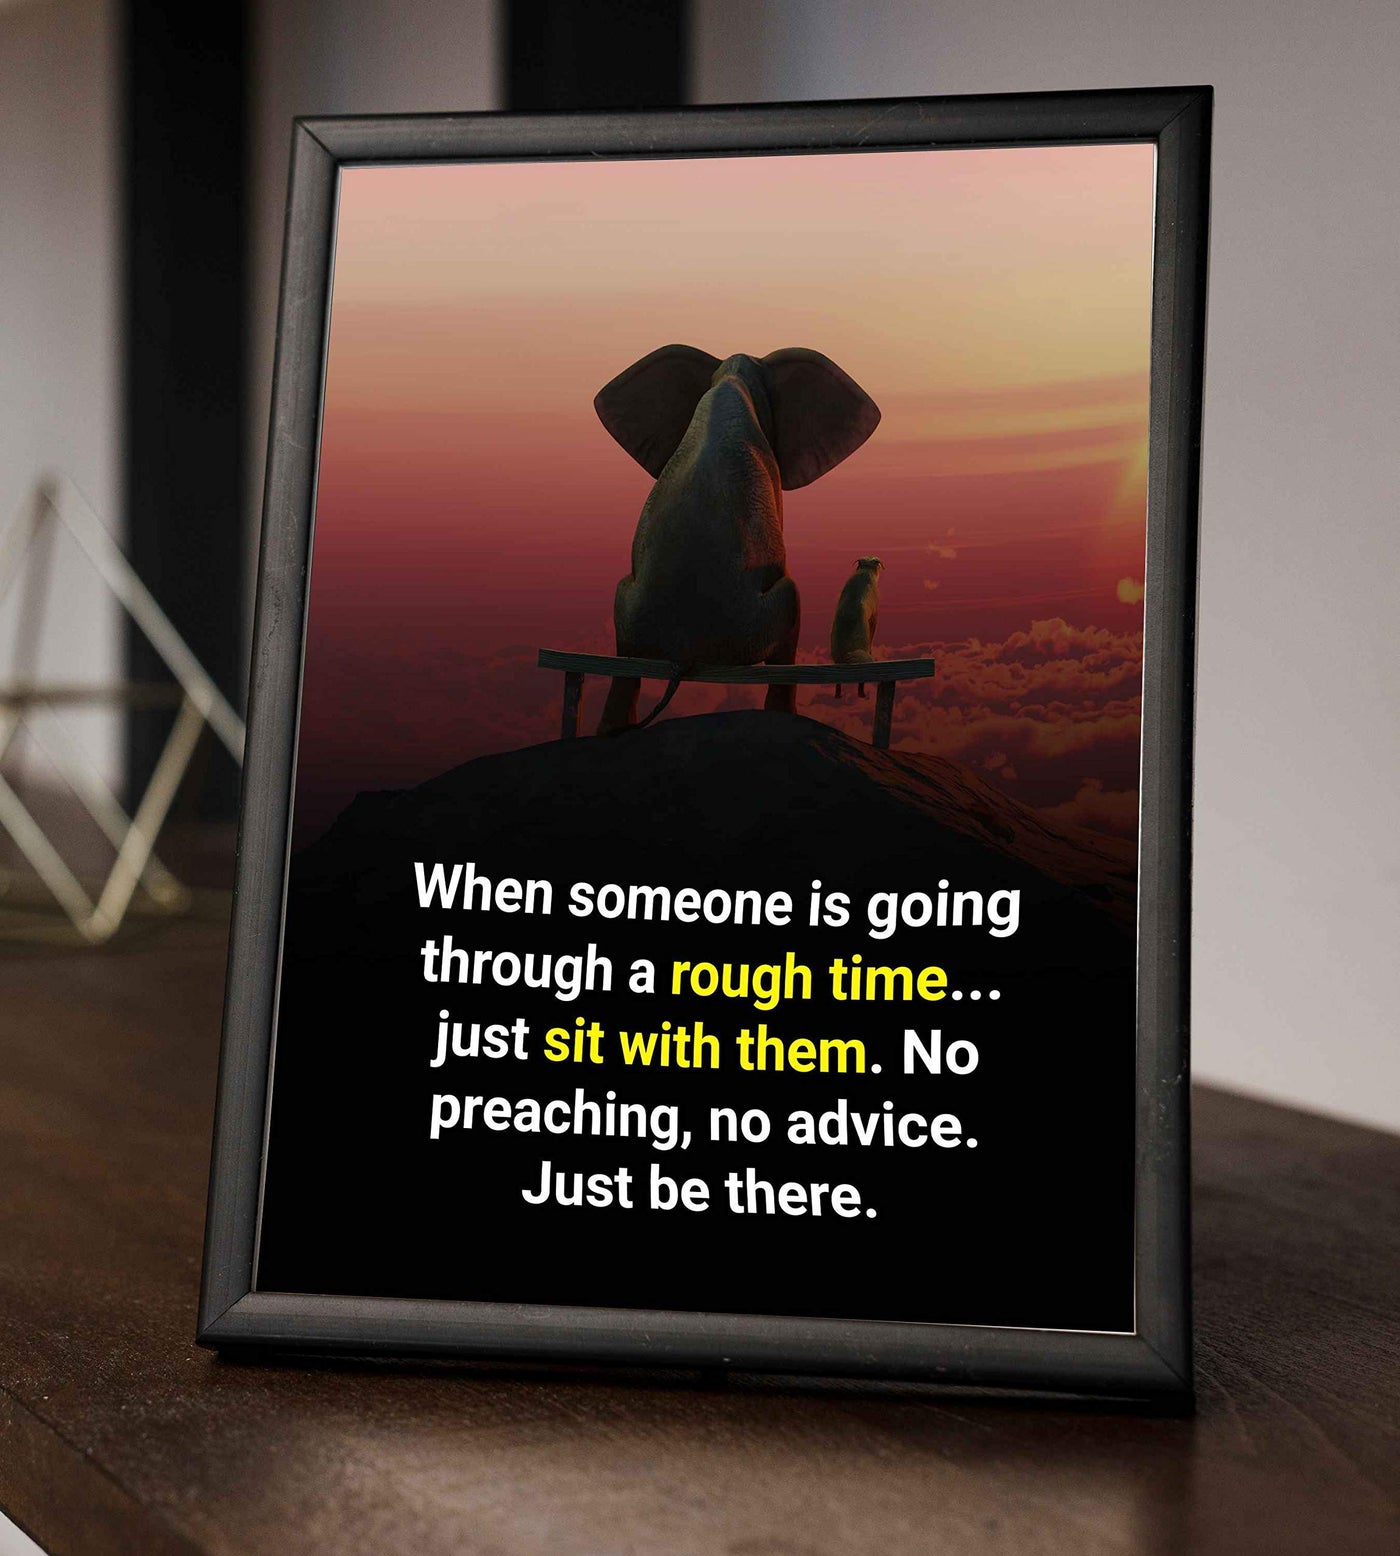 When Someone Is Going Through a Rough Time-Just Be There-Inspirational Wall Art -8 x 10" Sunset Print w/Elephant & Dog Image-Ready to Frame. Home-Office-School-Dorm-Decor. Reminder to Be Present!